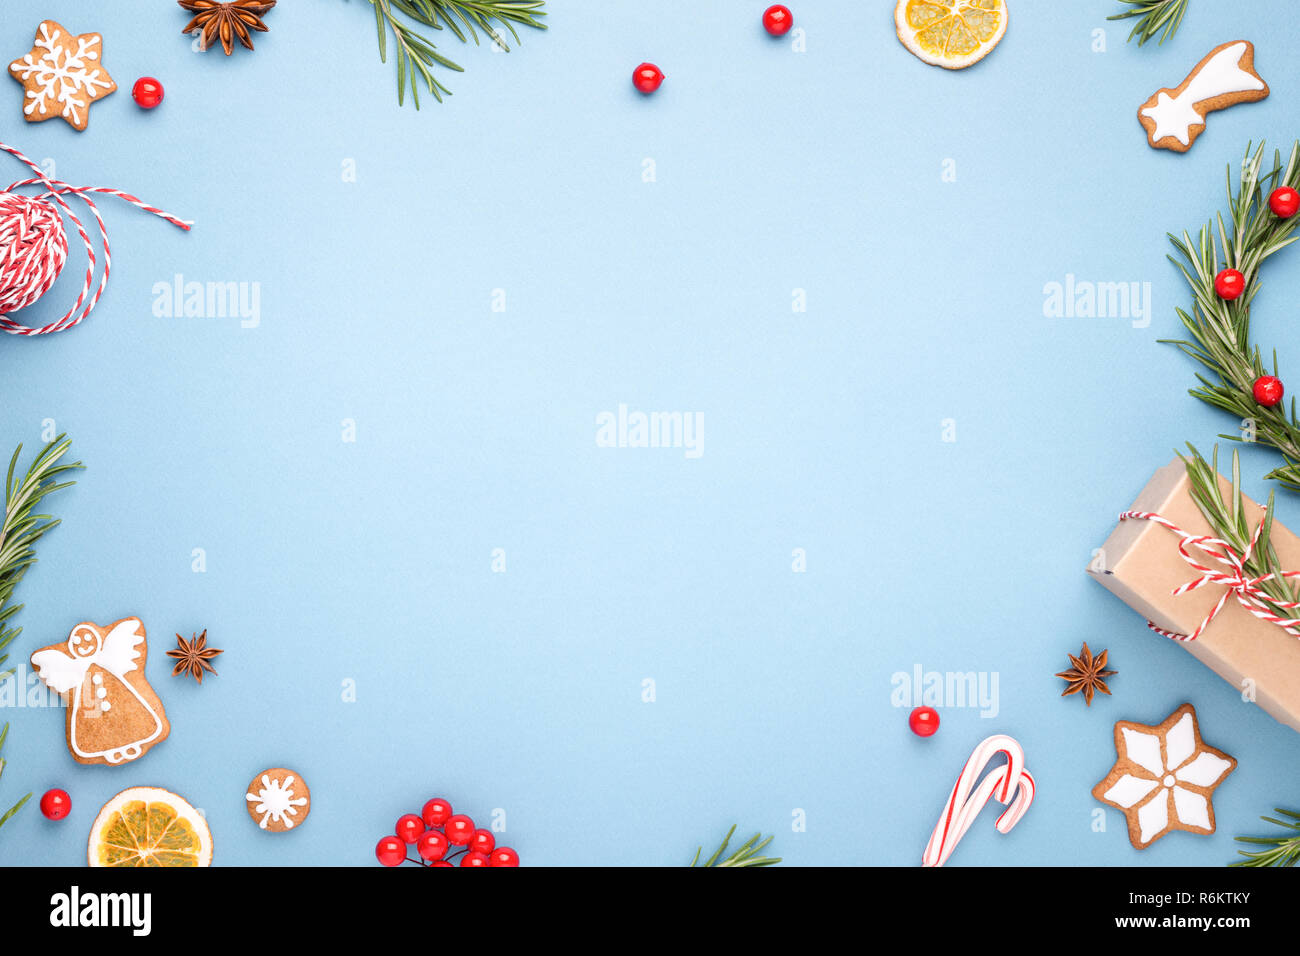 Blue Christmas background made of gigerbread cookies, rosemary branches, berries, gift box, Christmas wreath, cande cane lollipops and rope. Top view. Stock Photo